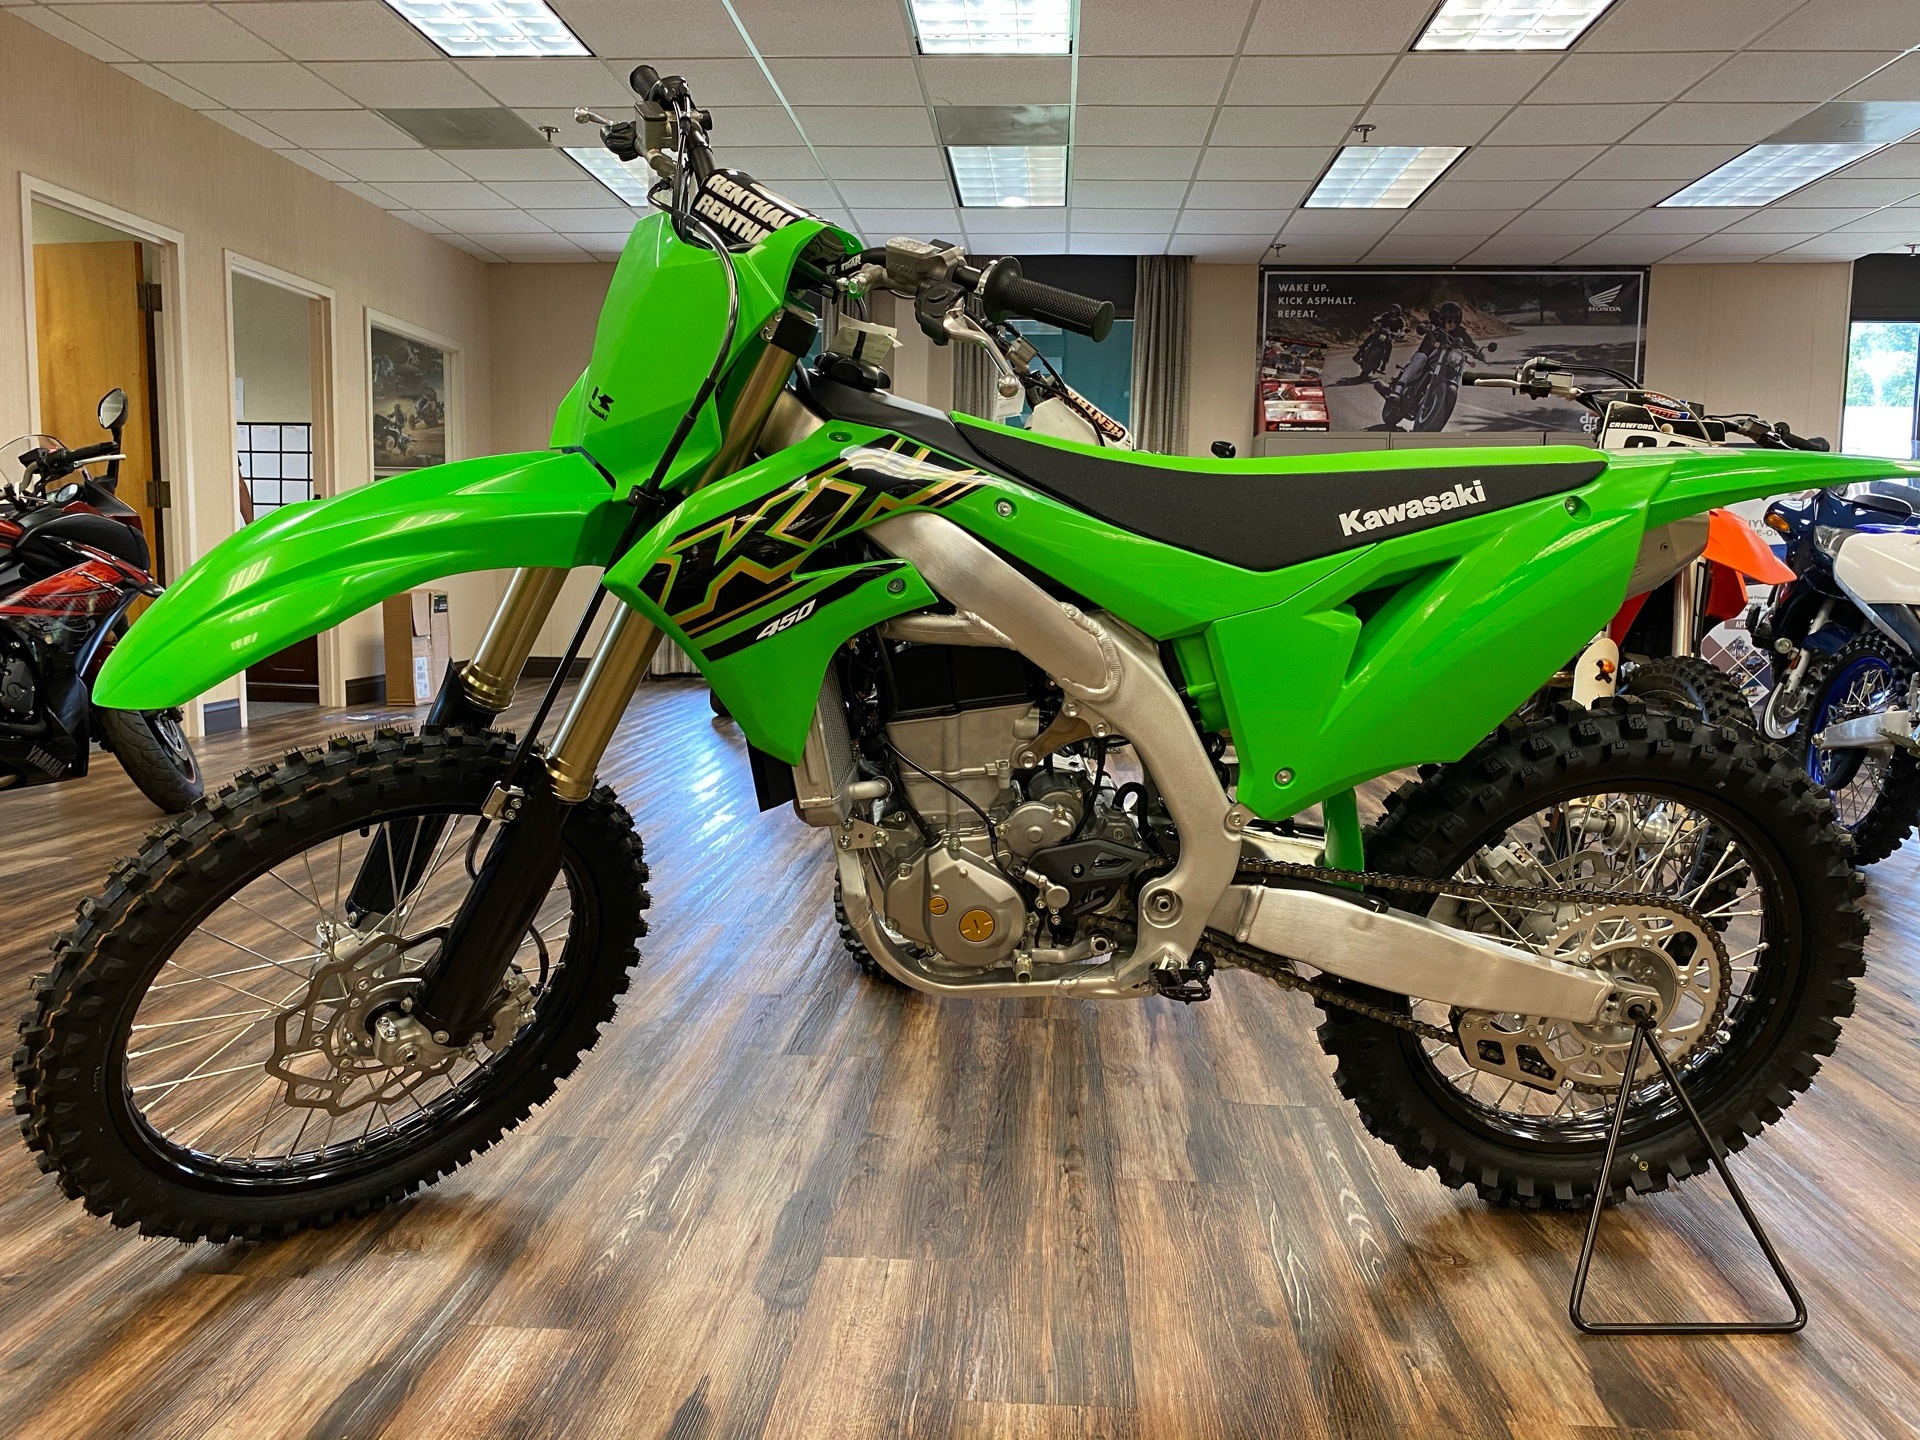 New Kawasaki 450 Motorcycles Statesville, NC | Stock Number: 018755 greatwesternmotorcycles.com